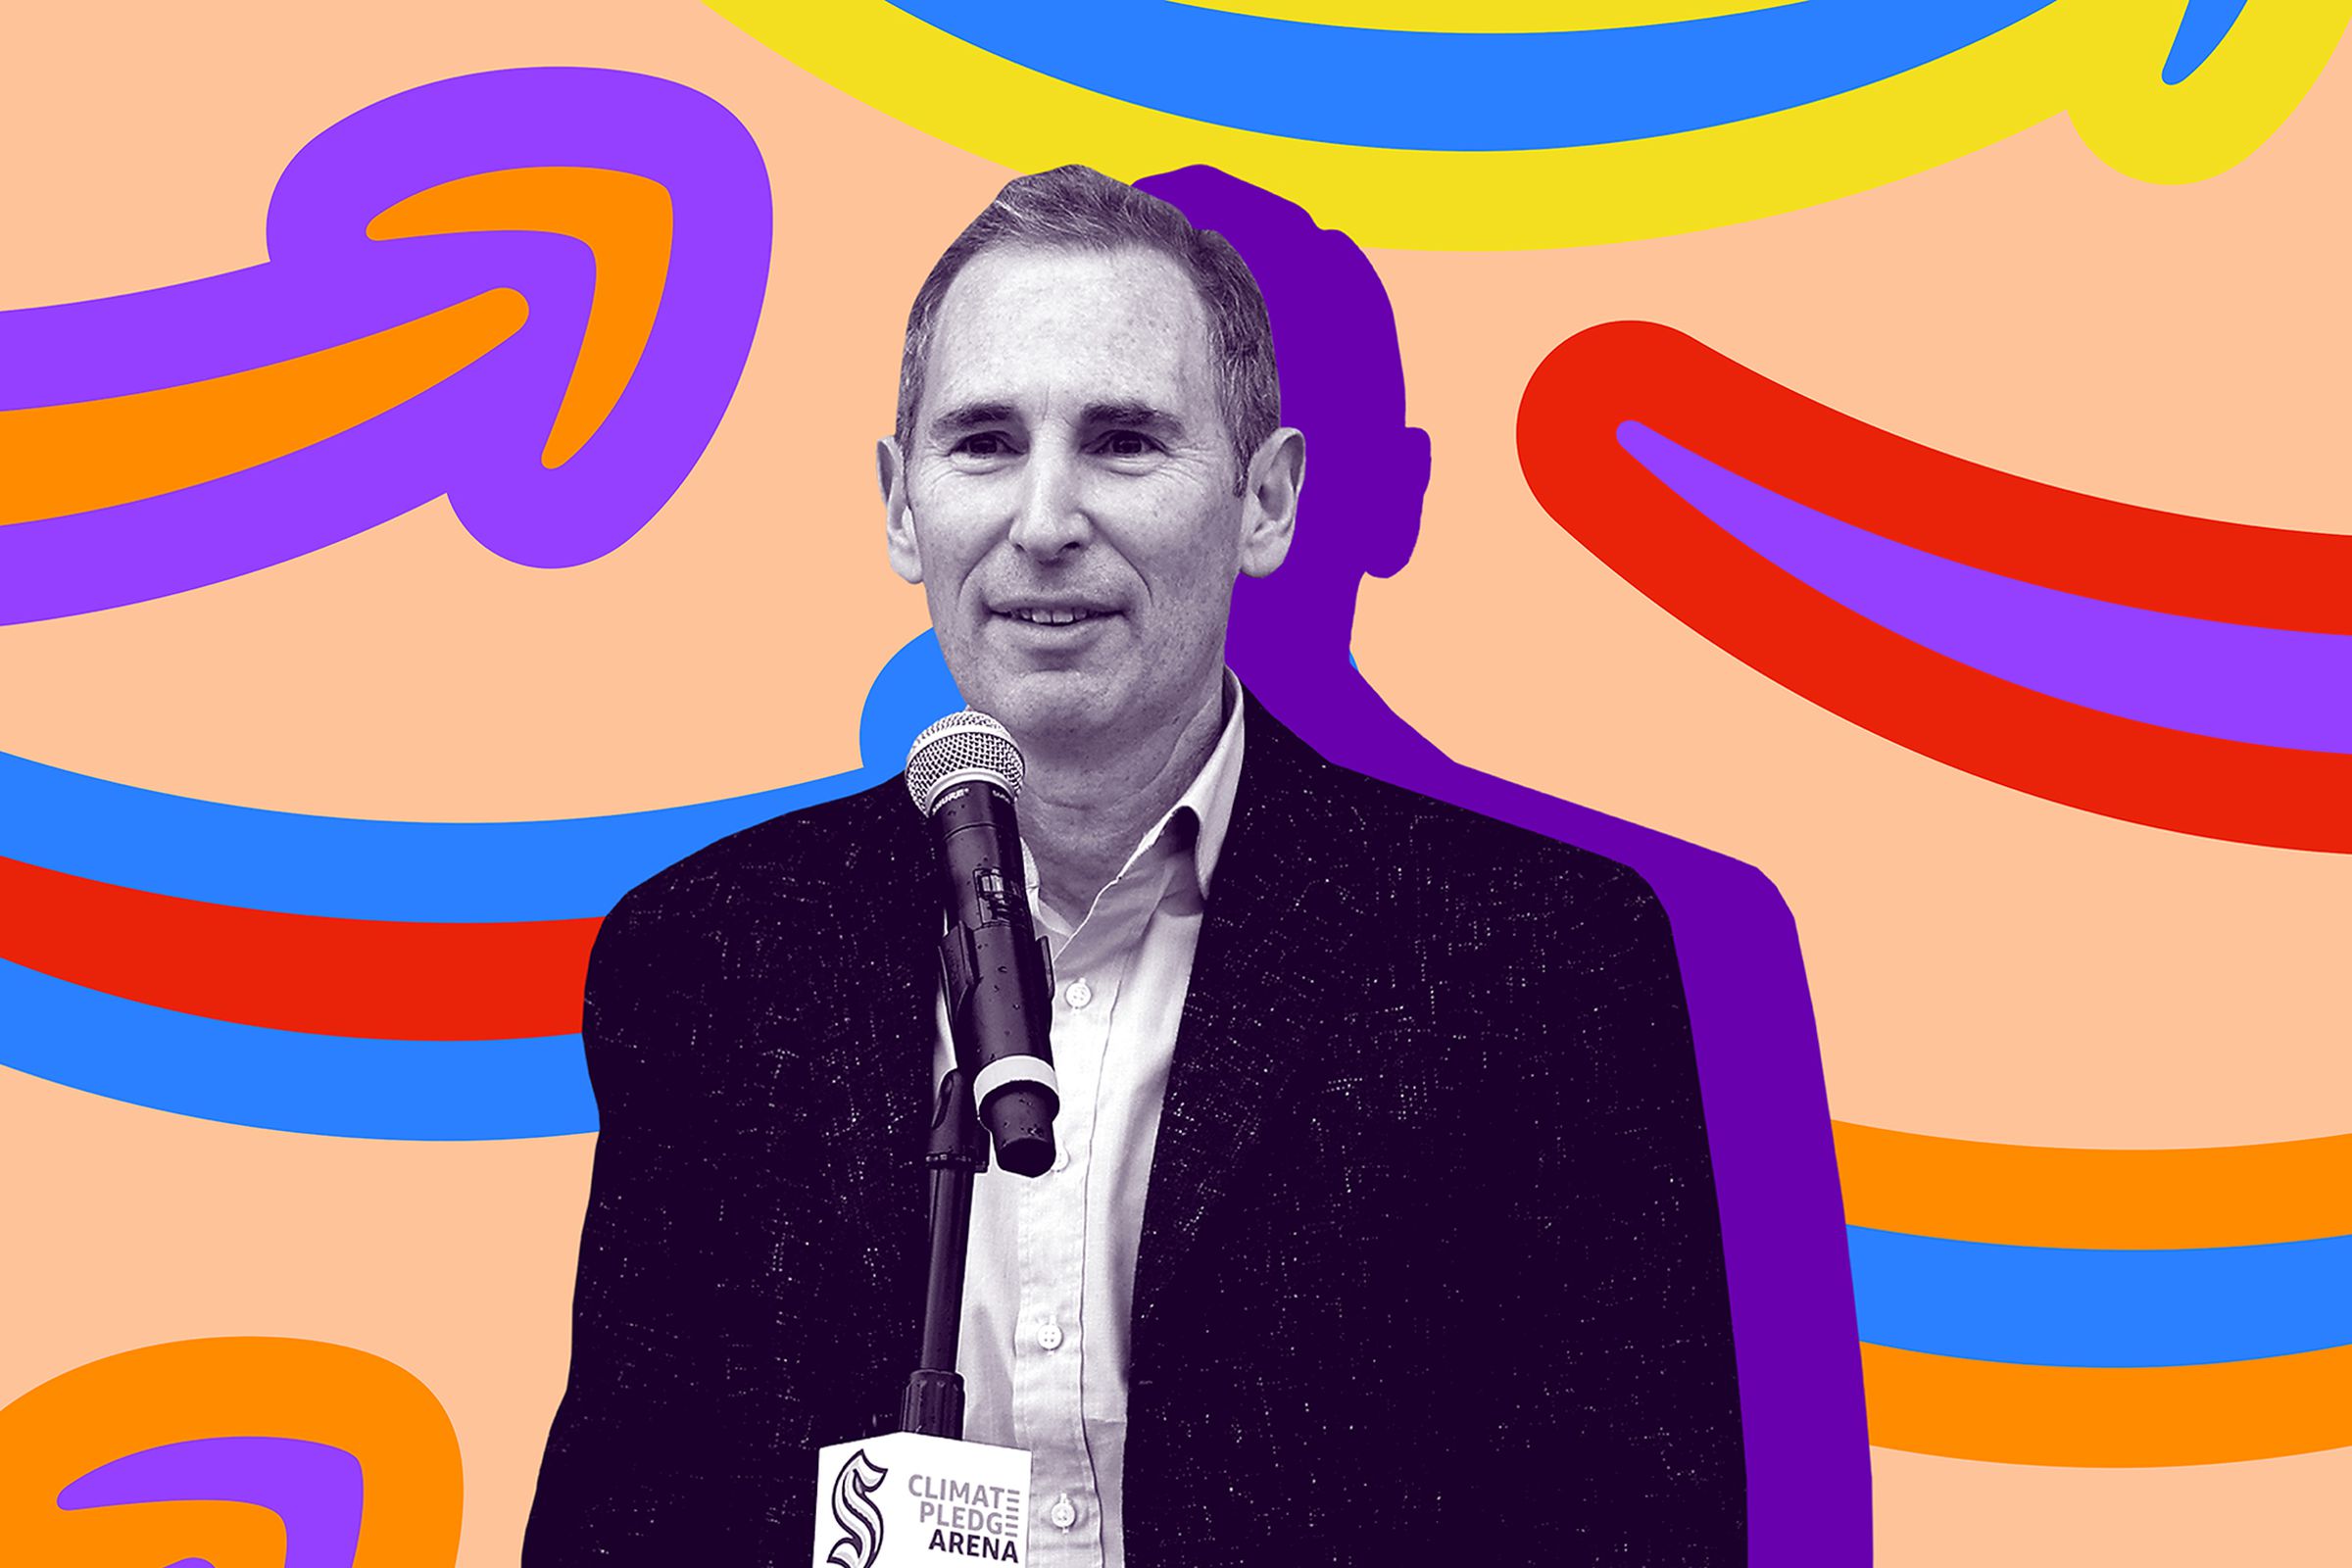 An image showing Amazon CEO Andy Jassy on a colorful background